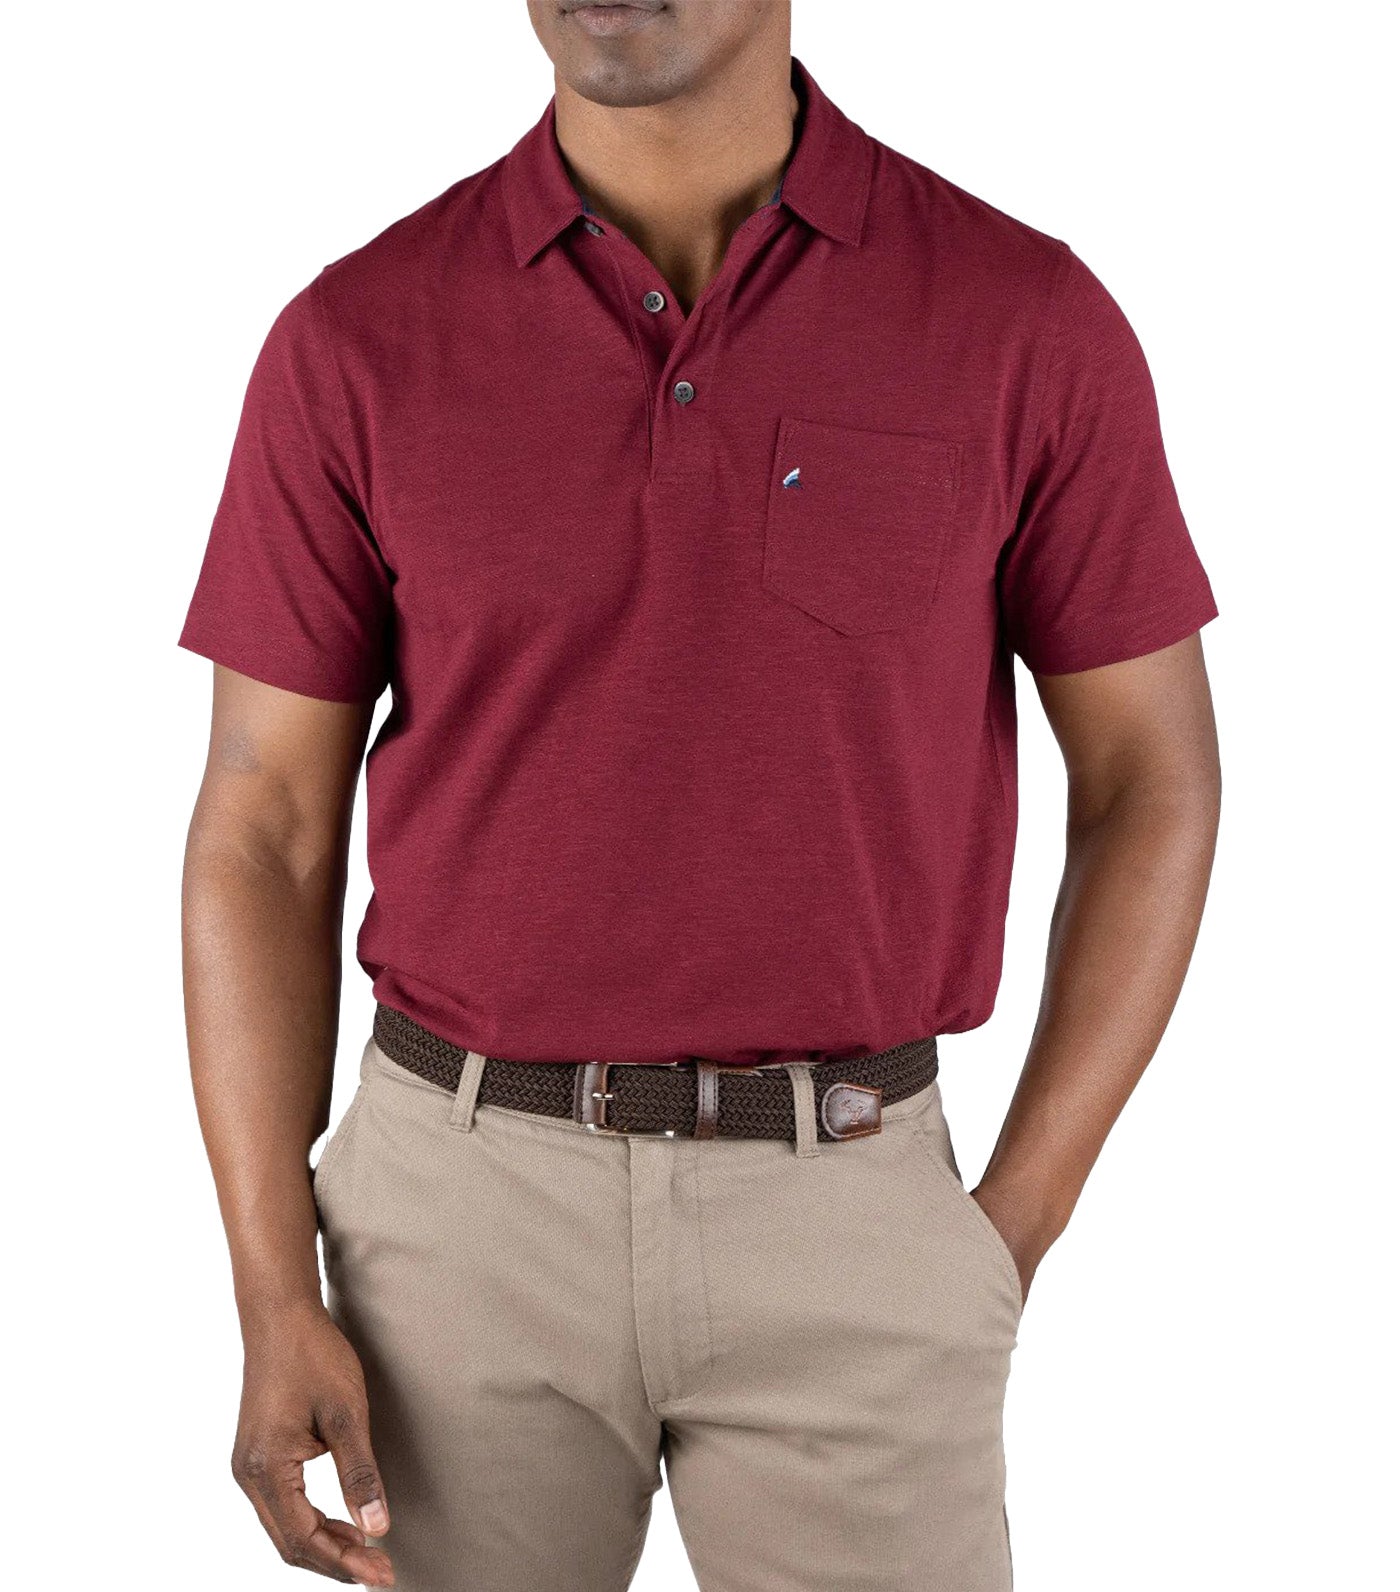 Airotec® Performance Jersey Polo-New! Zinfandel